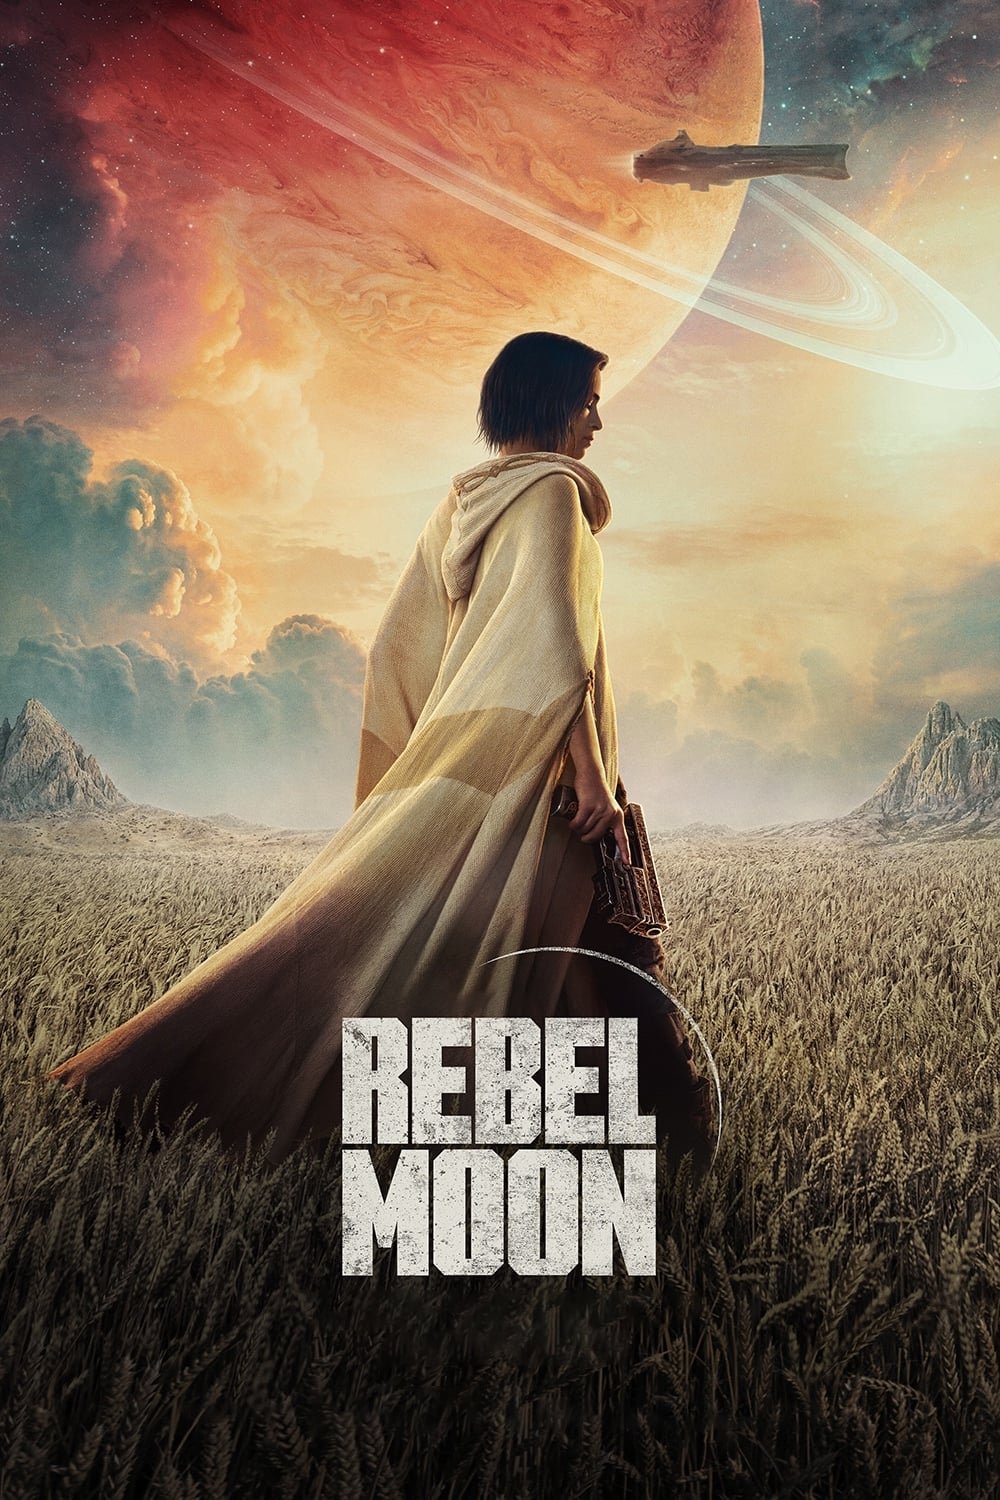 Rebel Moon: Part Two: The Scargiver (2024)